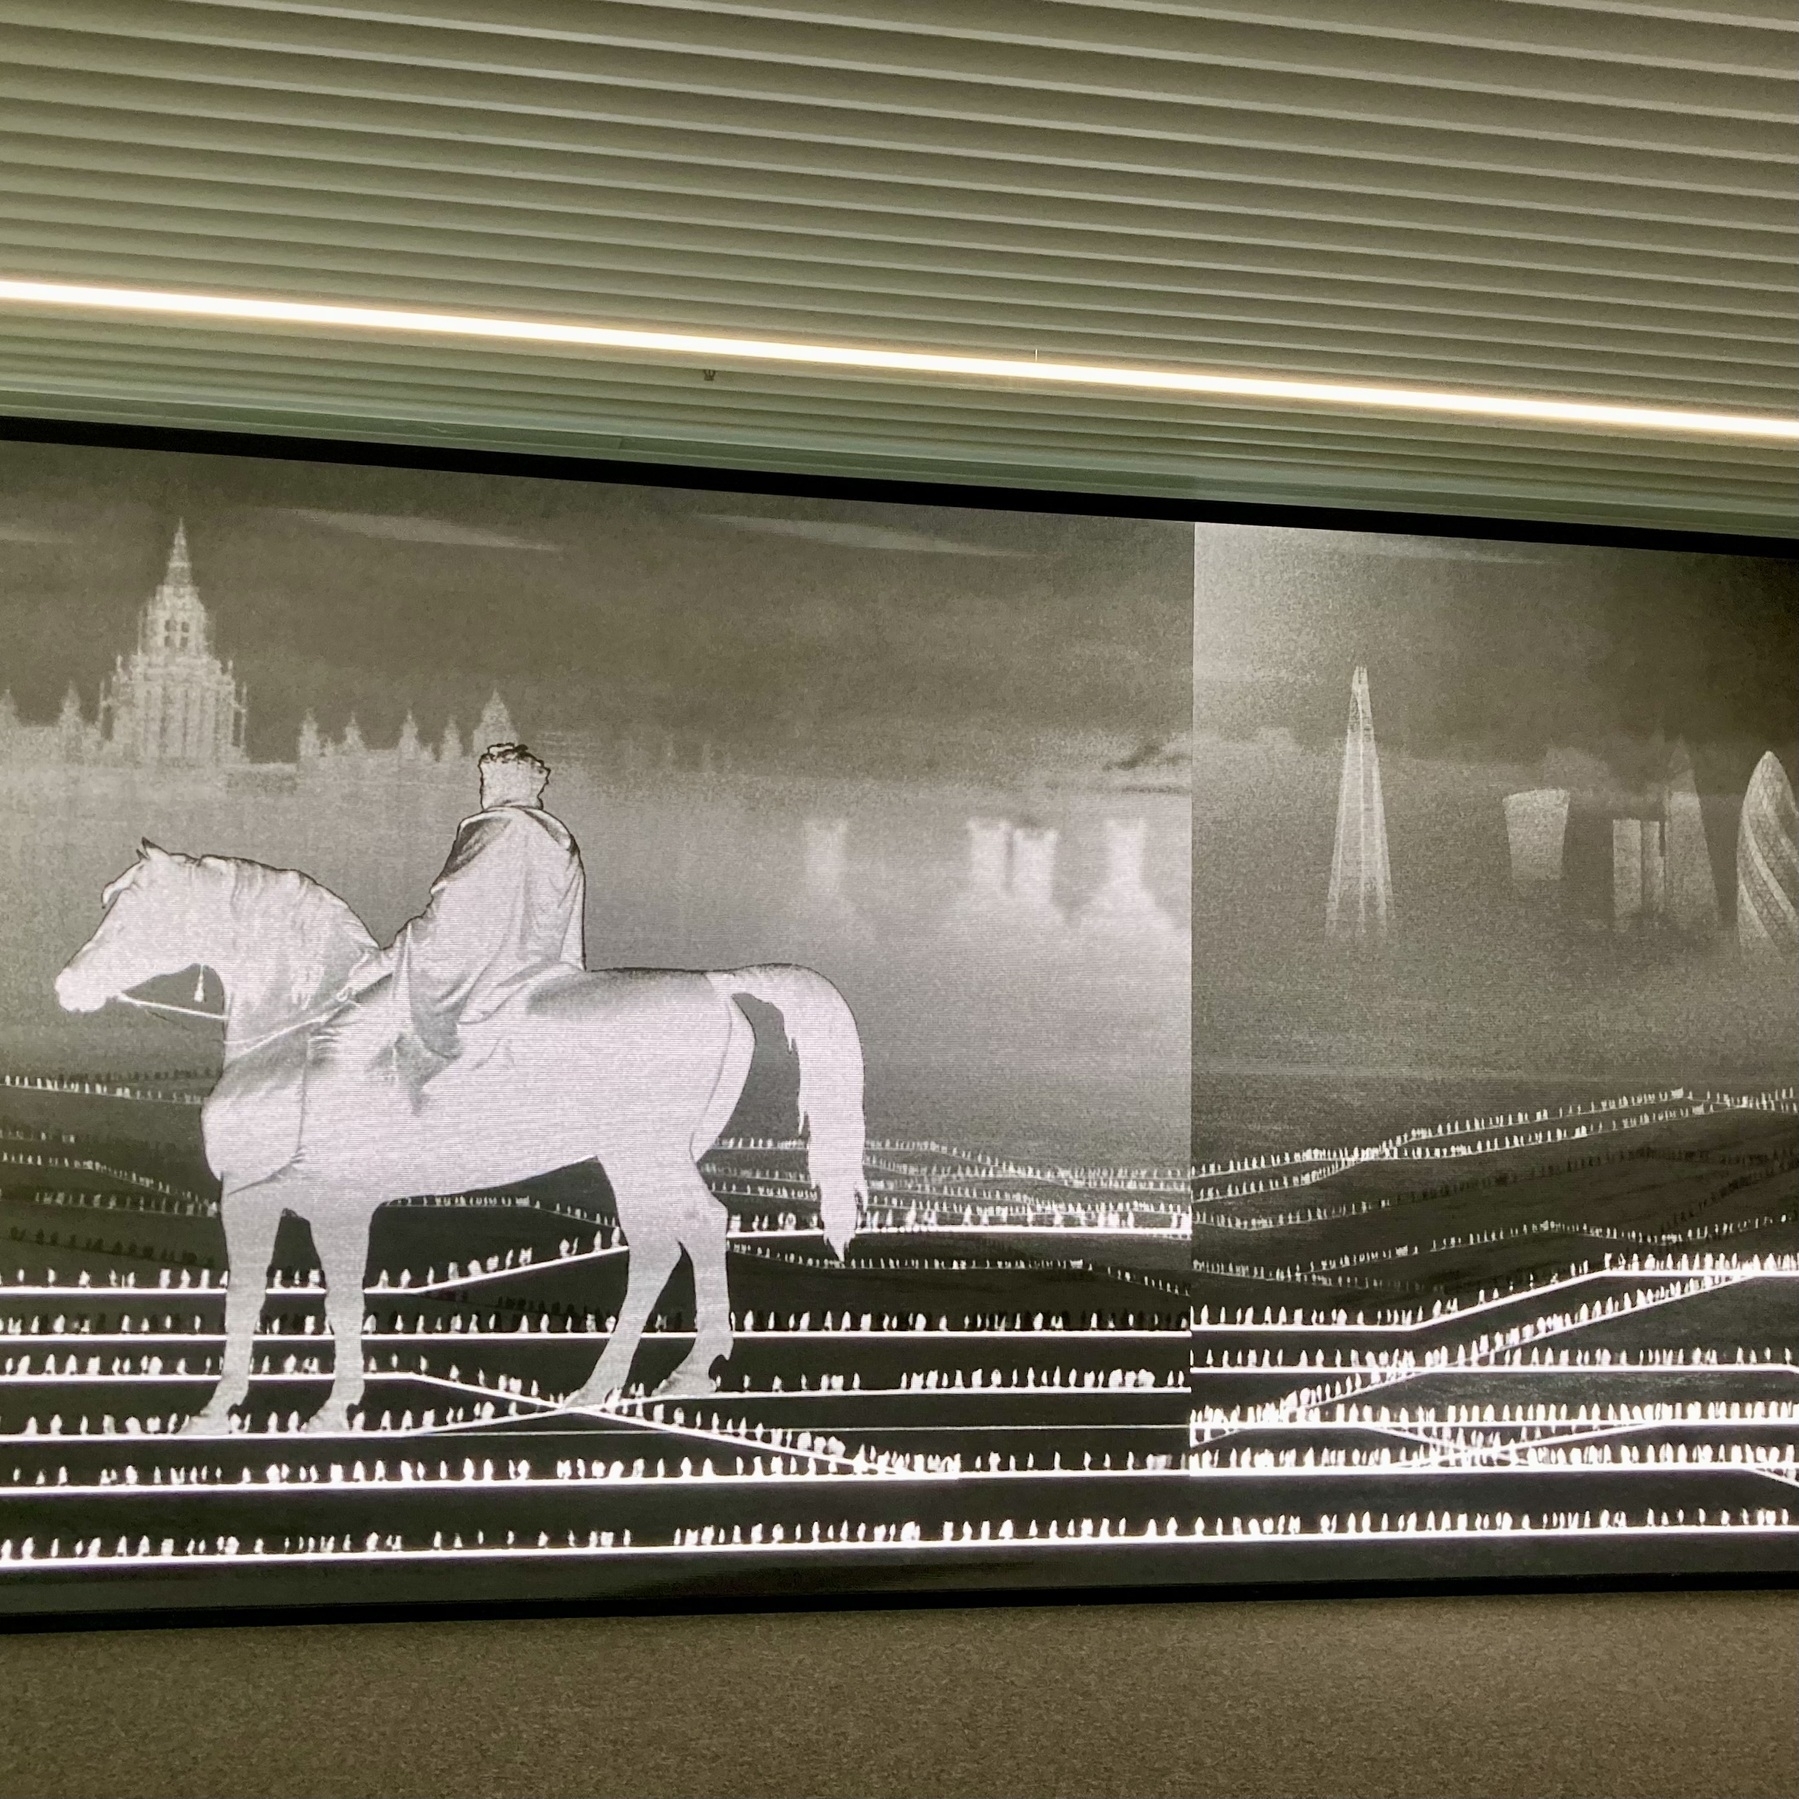 A wall-sized LED displaying a digital artwork at Canary Wharf has developed a glitch with the scene split in the middle - the scene itself is a dreamlike London skyline with small figures whizzing around in invisible Tube trains